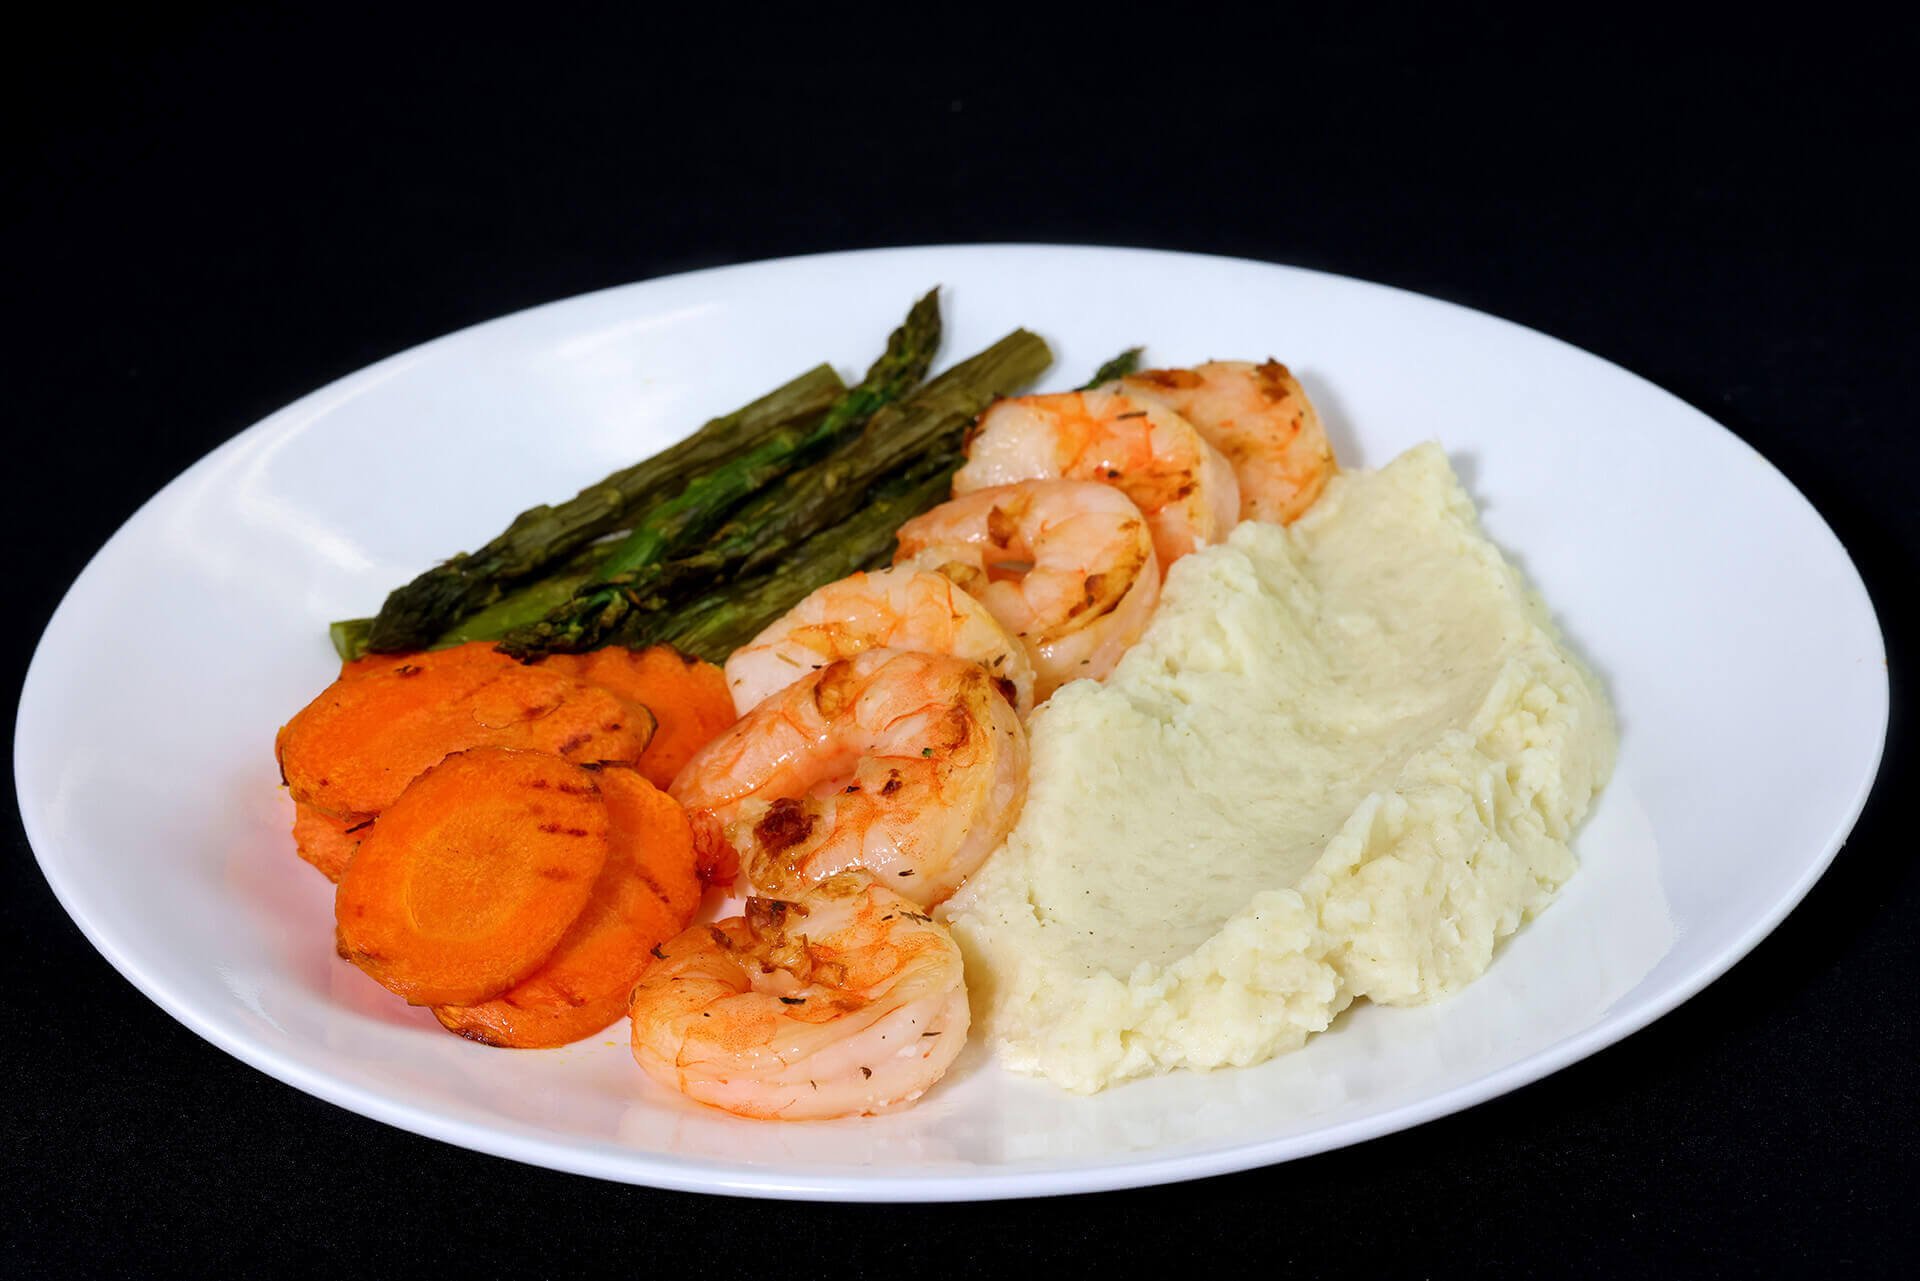 Paleo jumbo shrimp with carrots and string beans